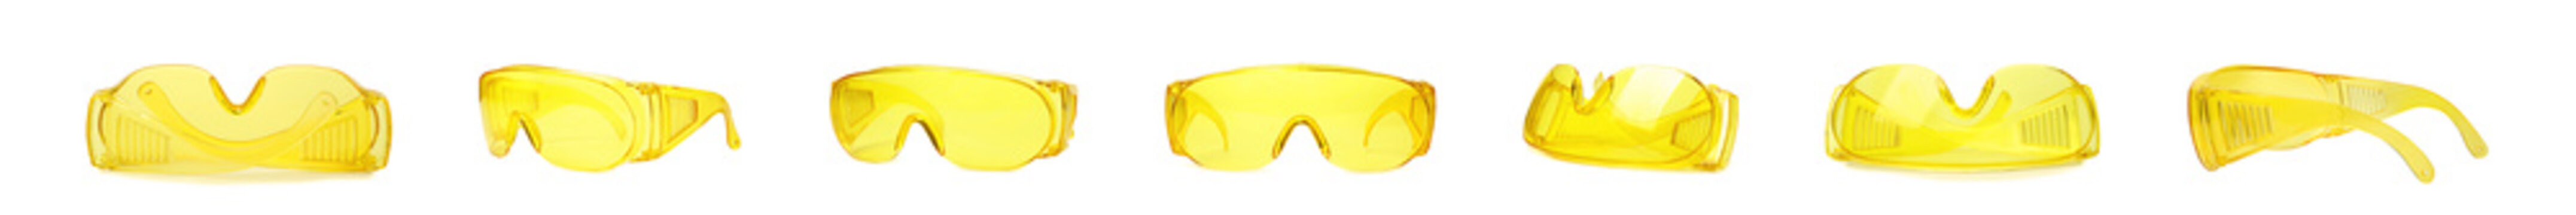 Set of yellow protective goggles on white background. Banner design